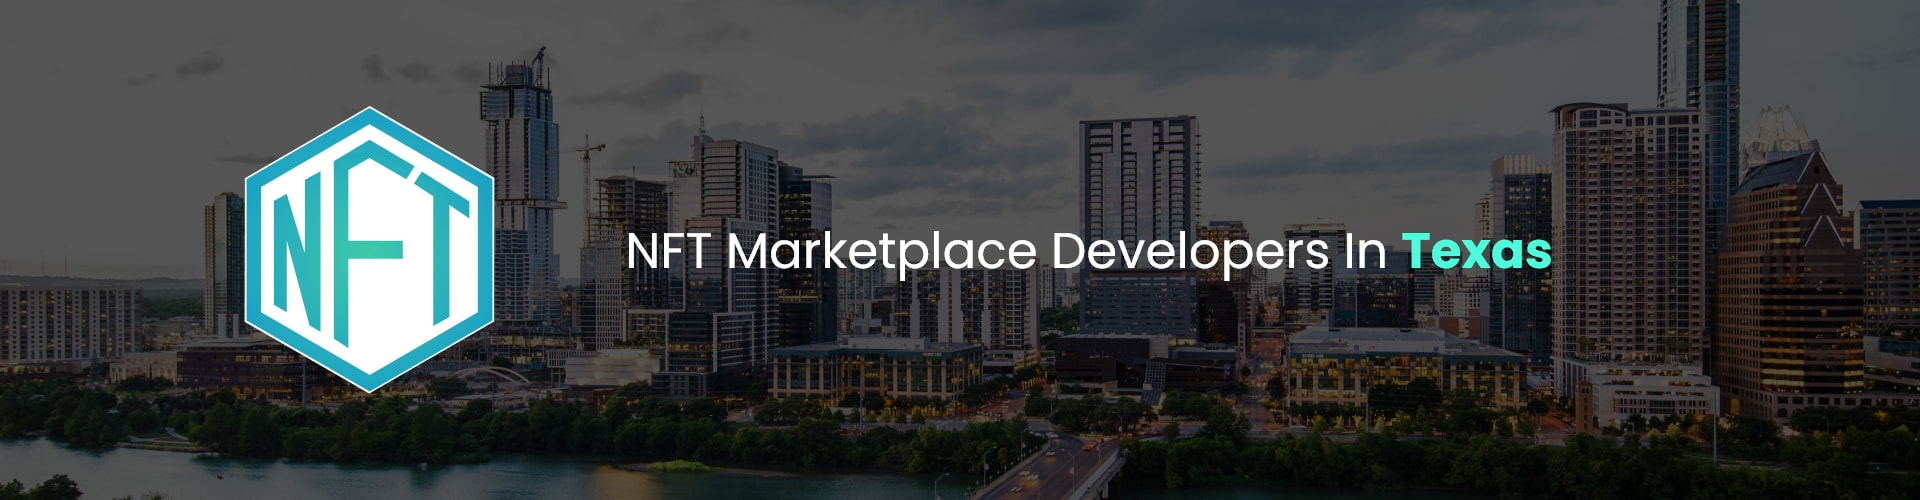 hire nft marketplace developers in Texas